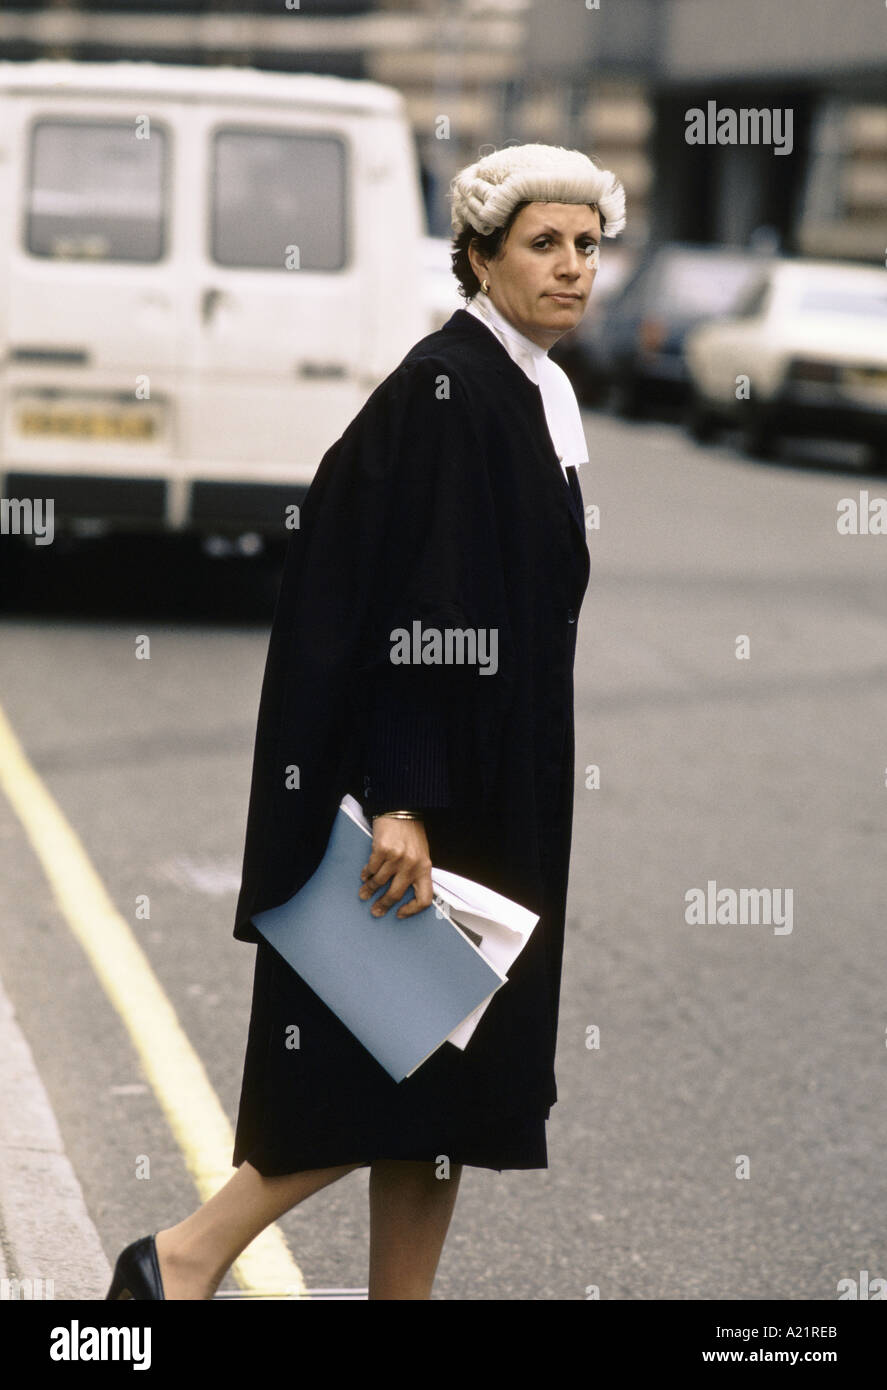 A female barrister, The High Court, London Stock Photo